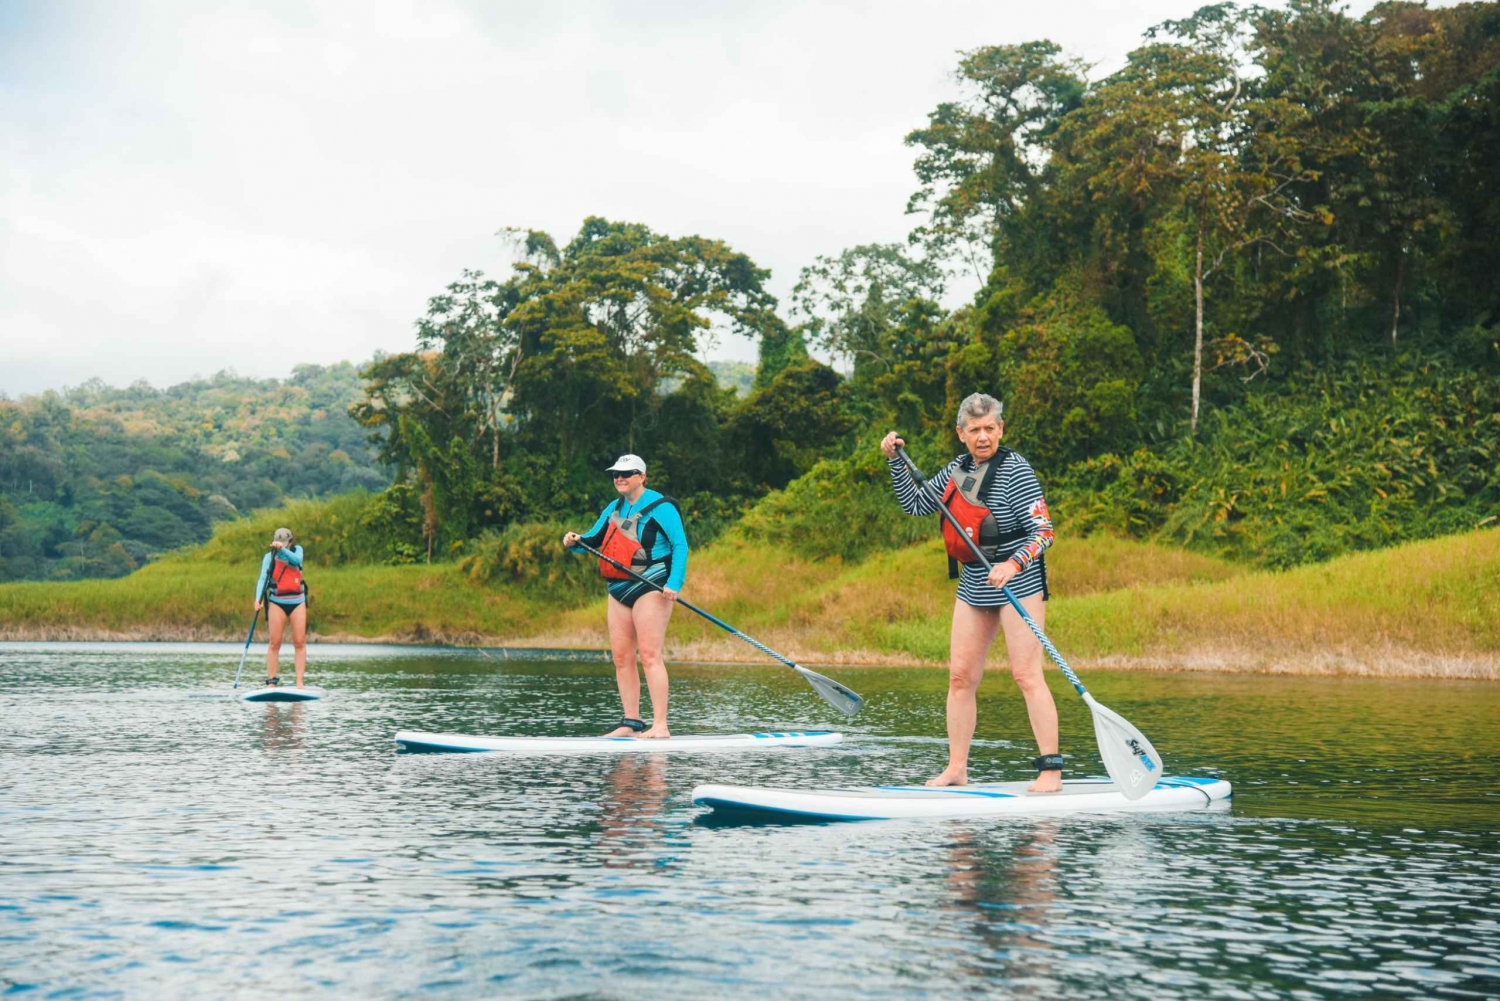 La Fortuna: Stand-Up Paddle Boarding on Lake Arenal